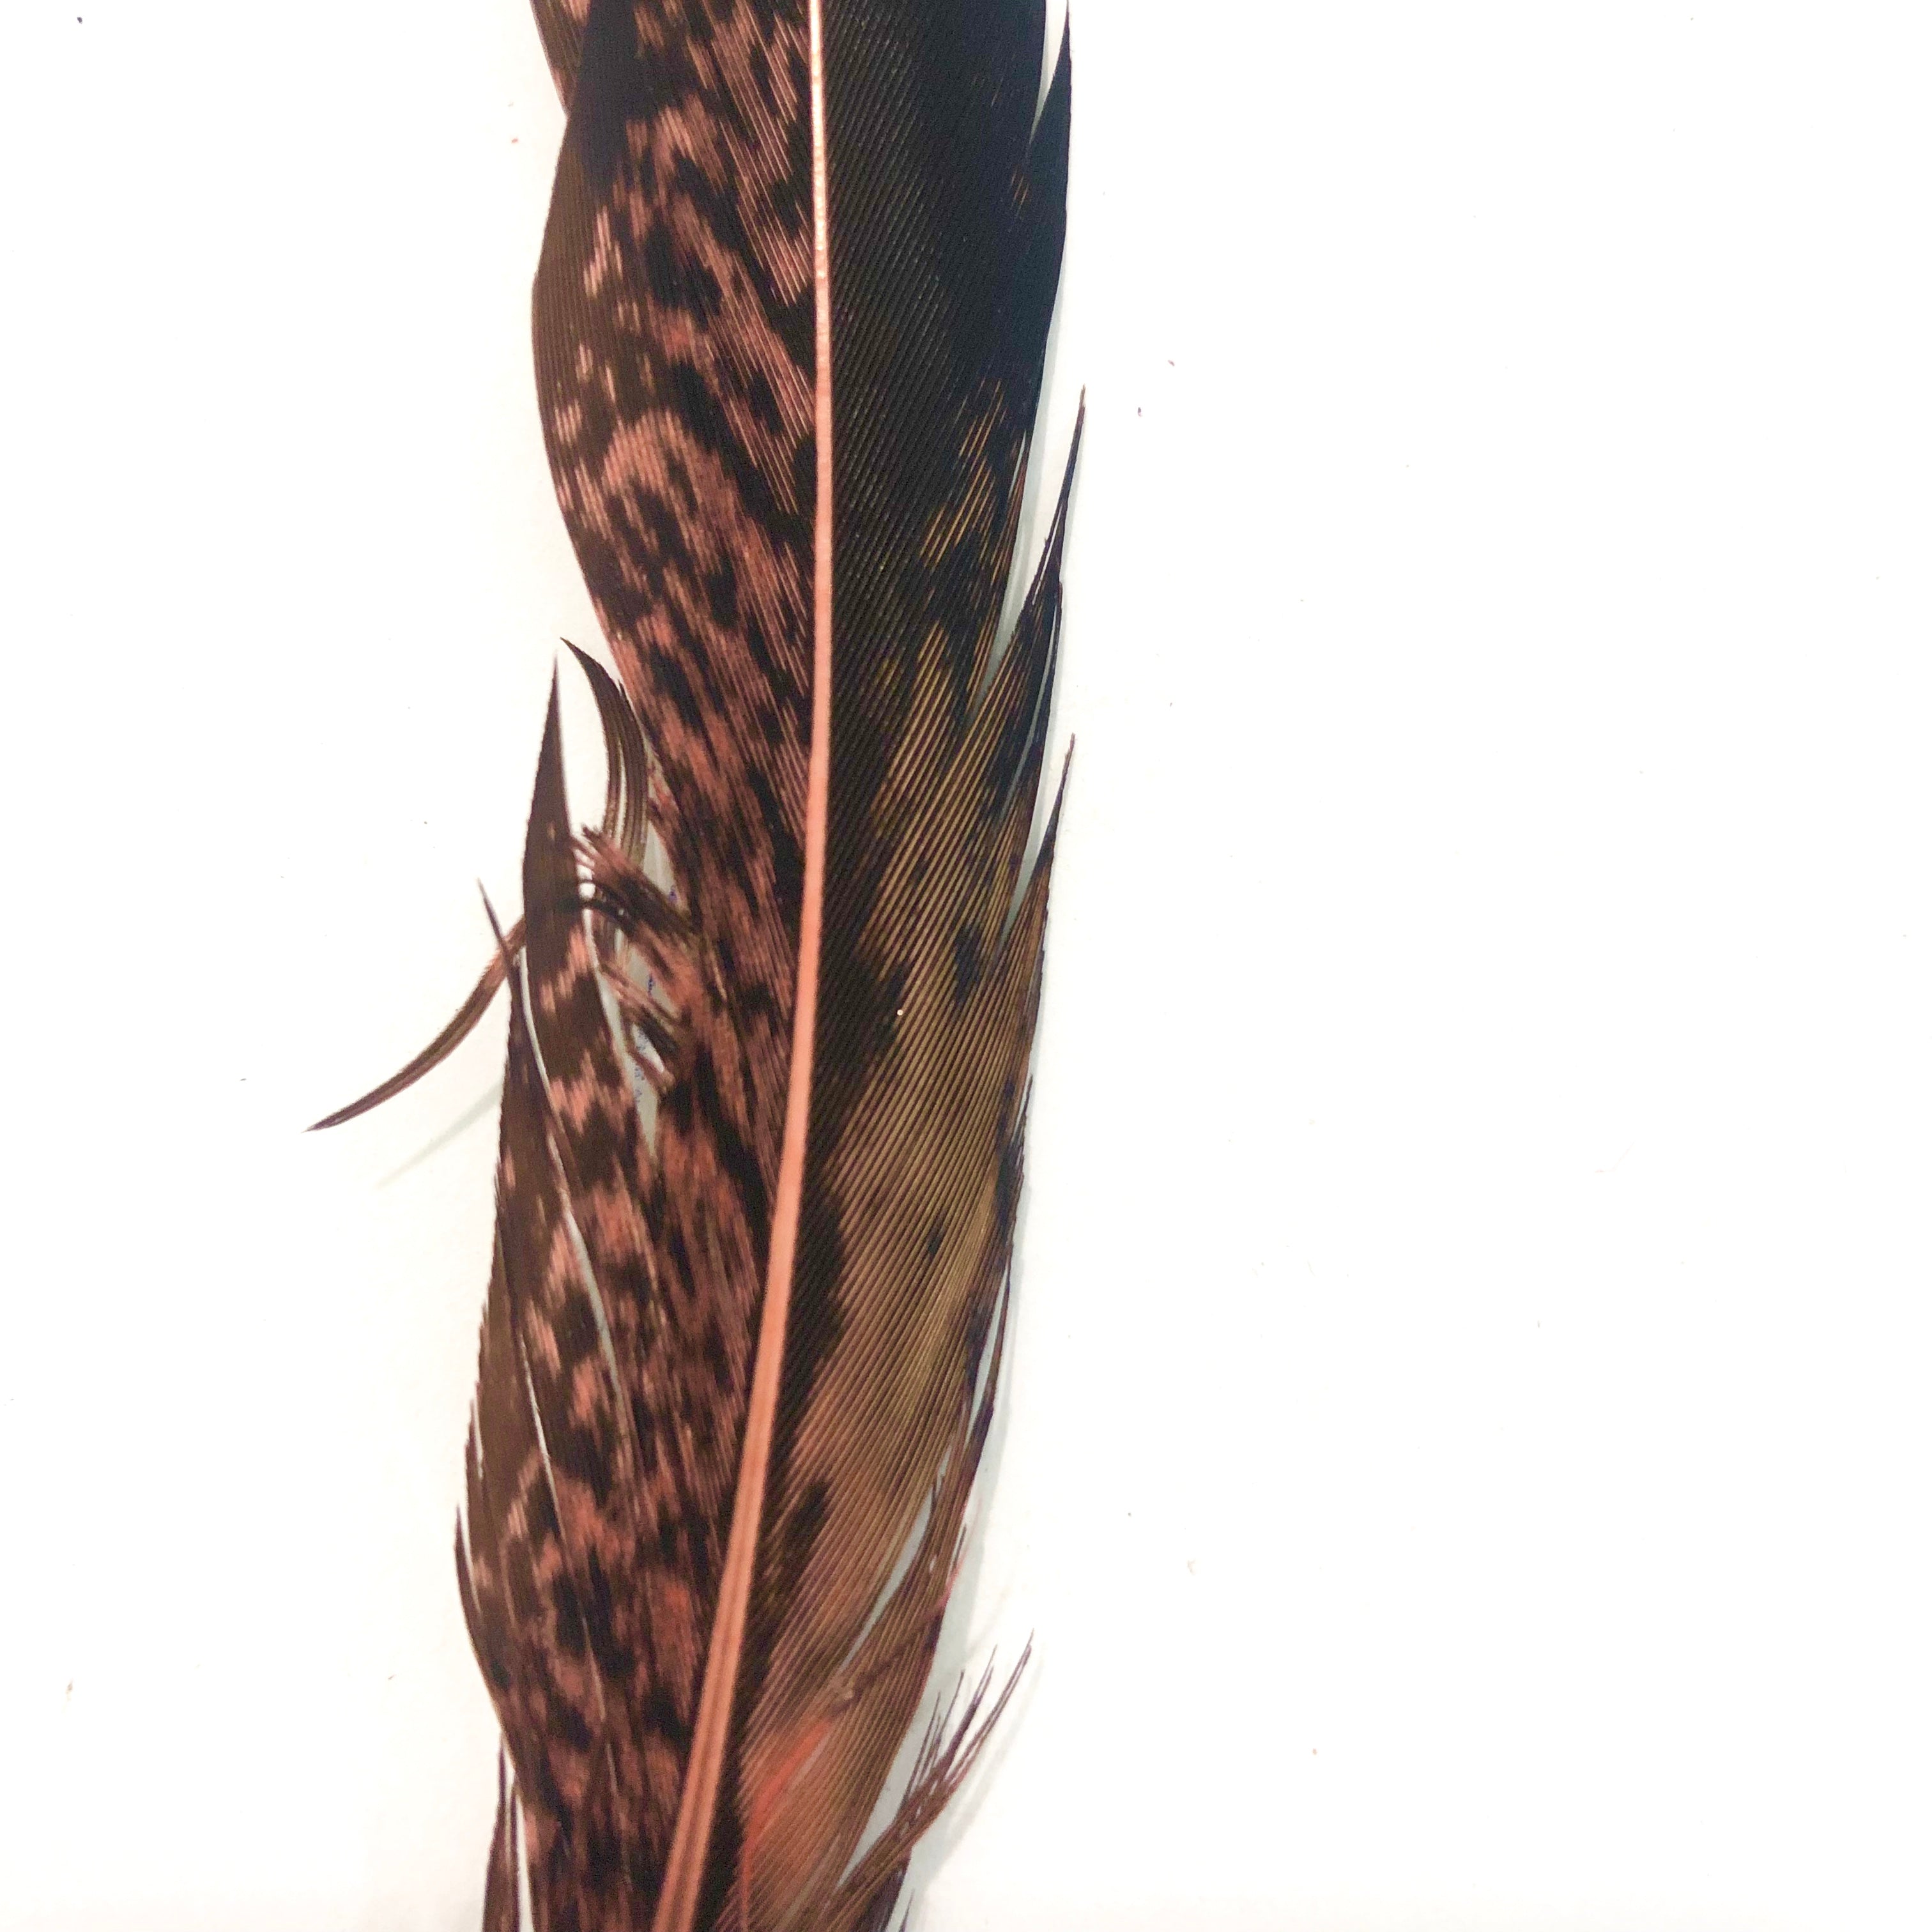 5" to 10" Lady Amherst Pheasant Side Tail Feather x 10 pcs - Dusty Pink